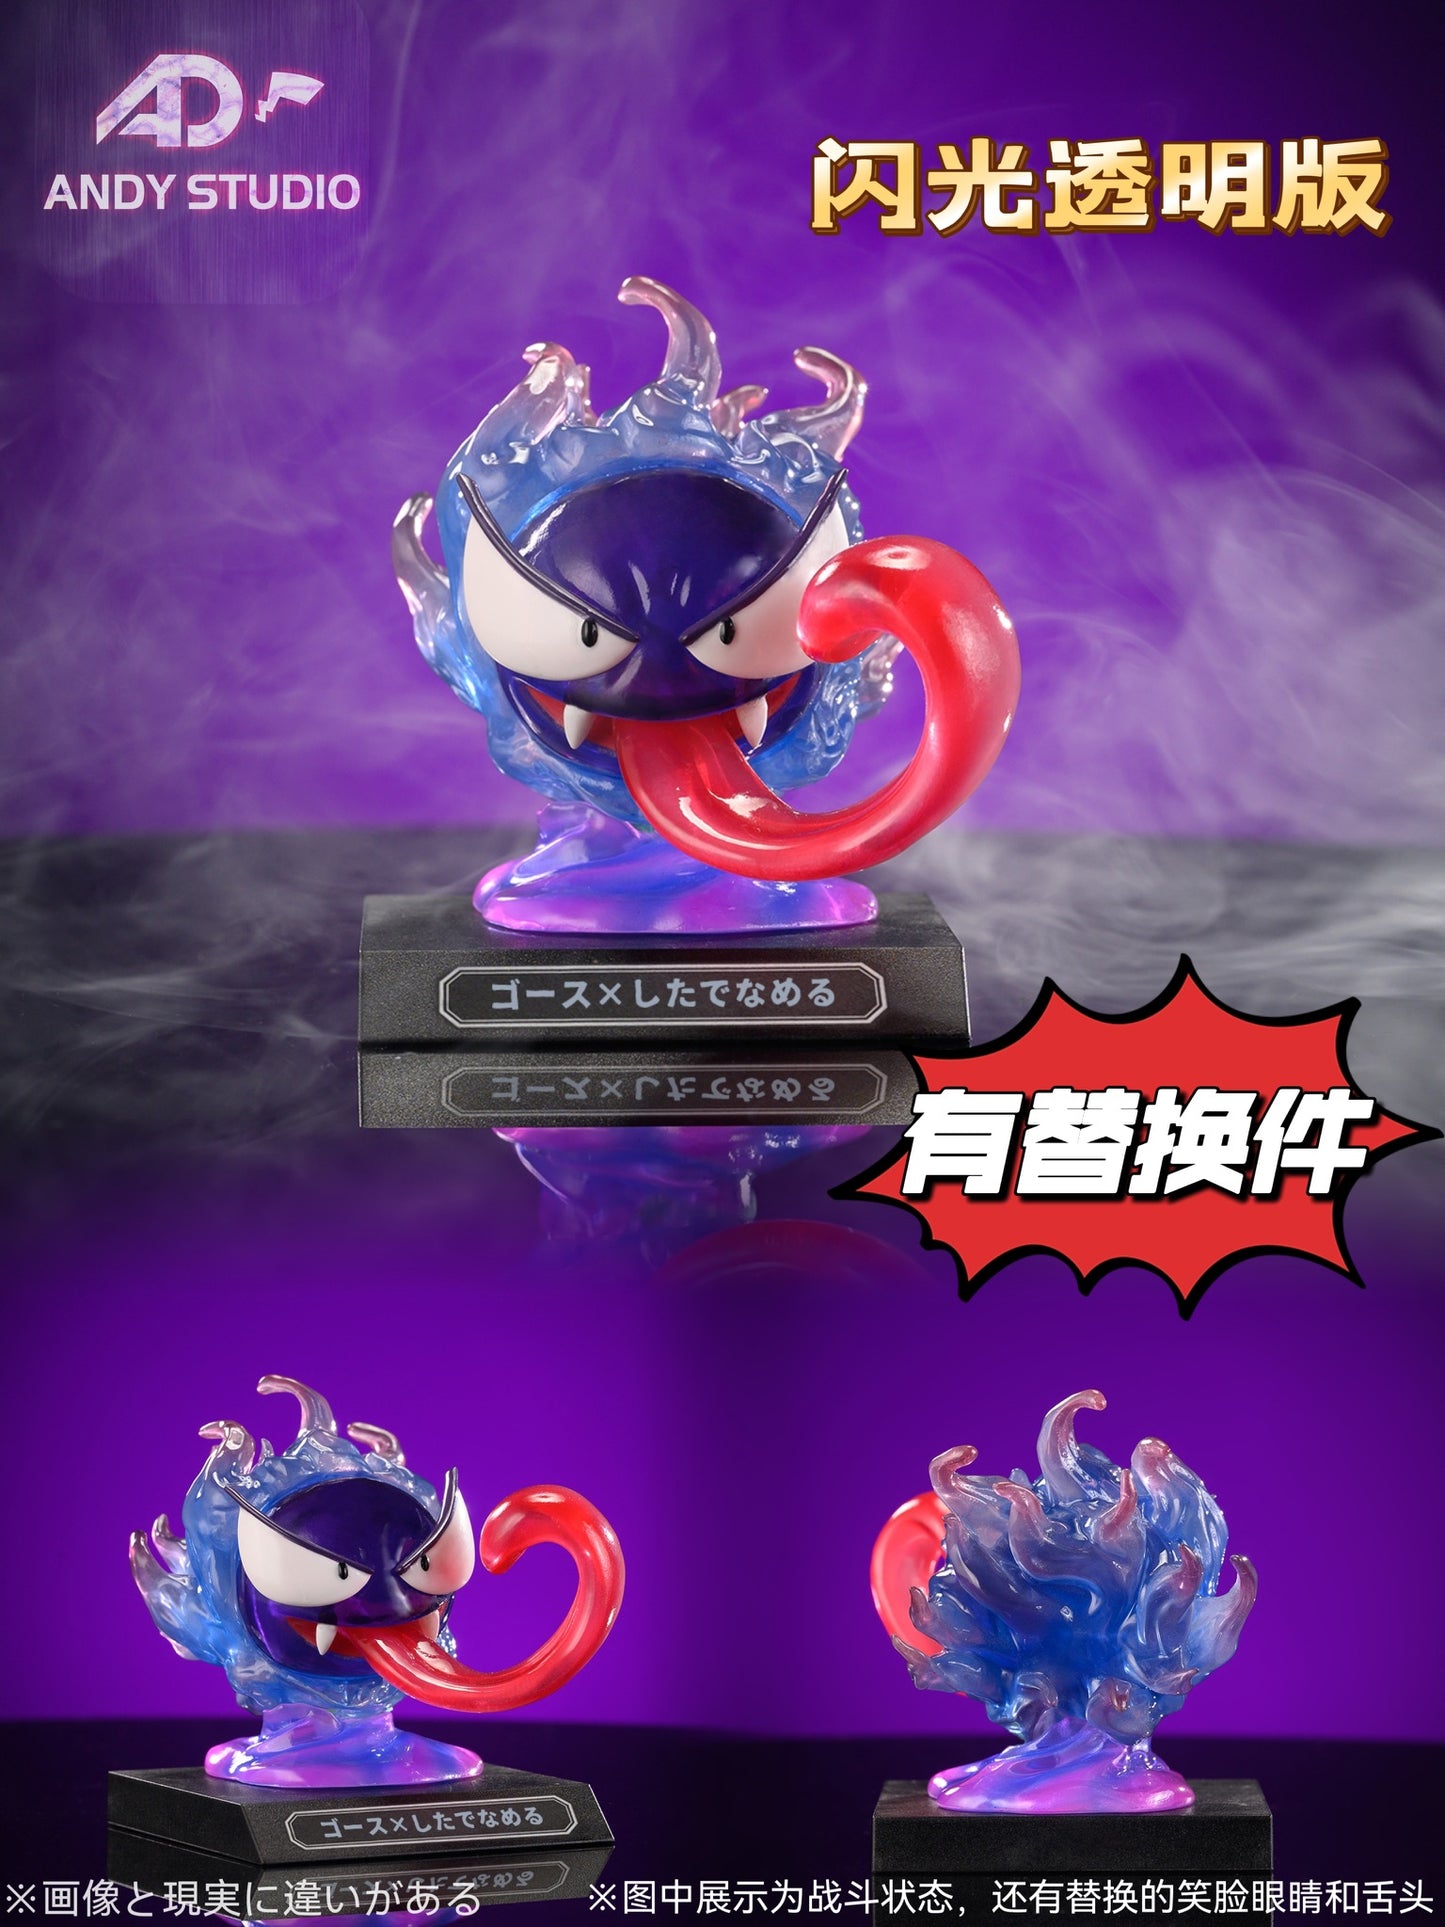 [PREORDER] 1/20 Scale World Figure [ANDY] - Gastly